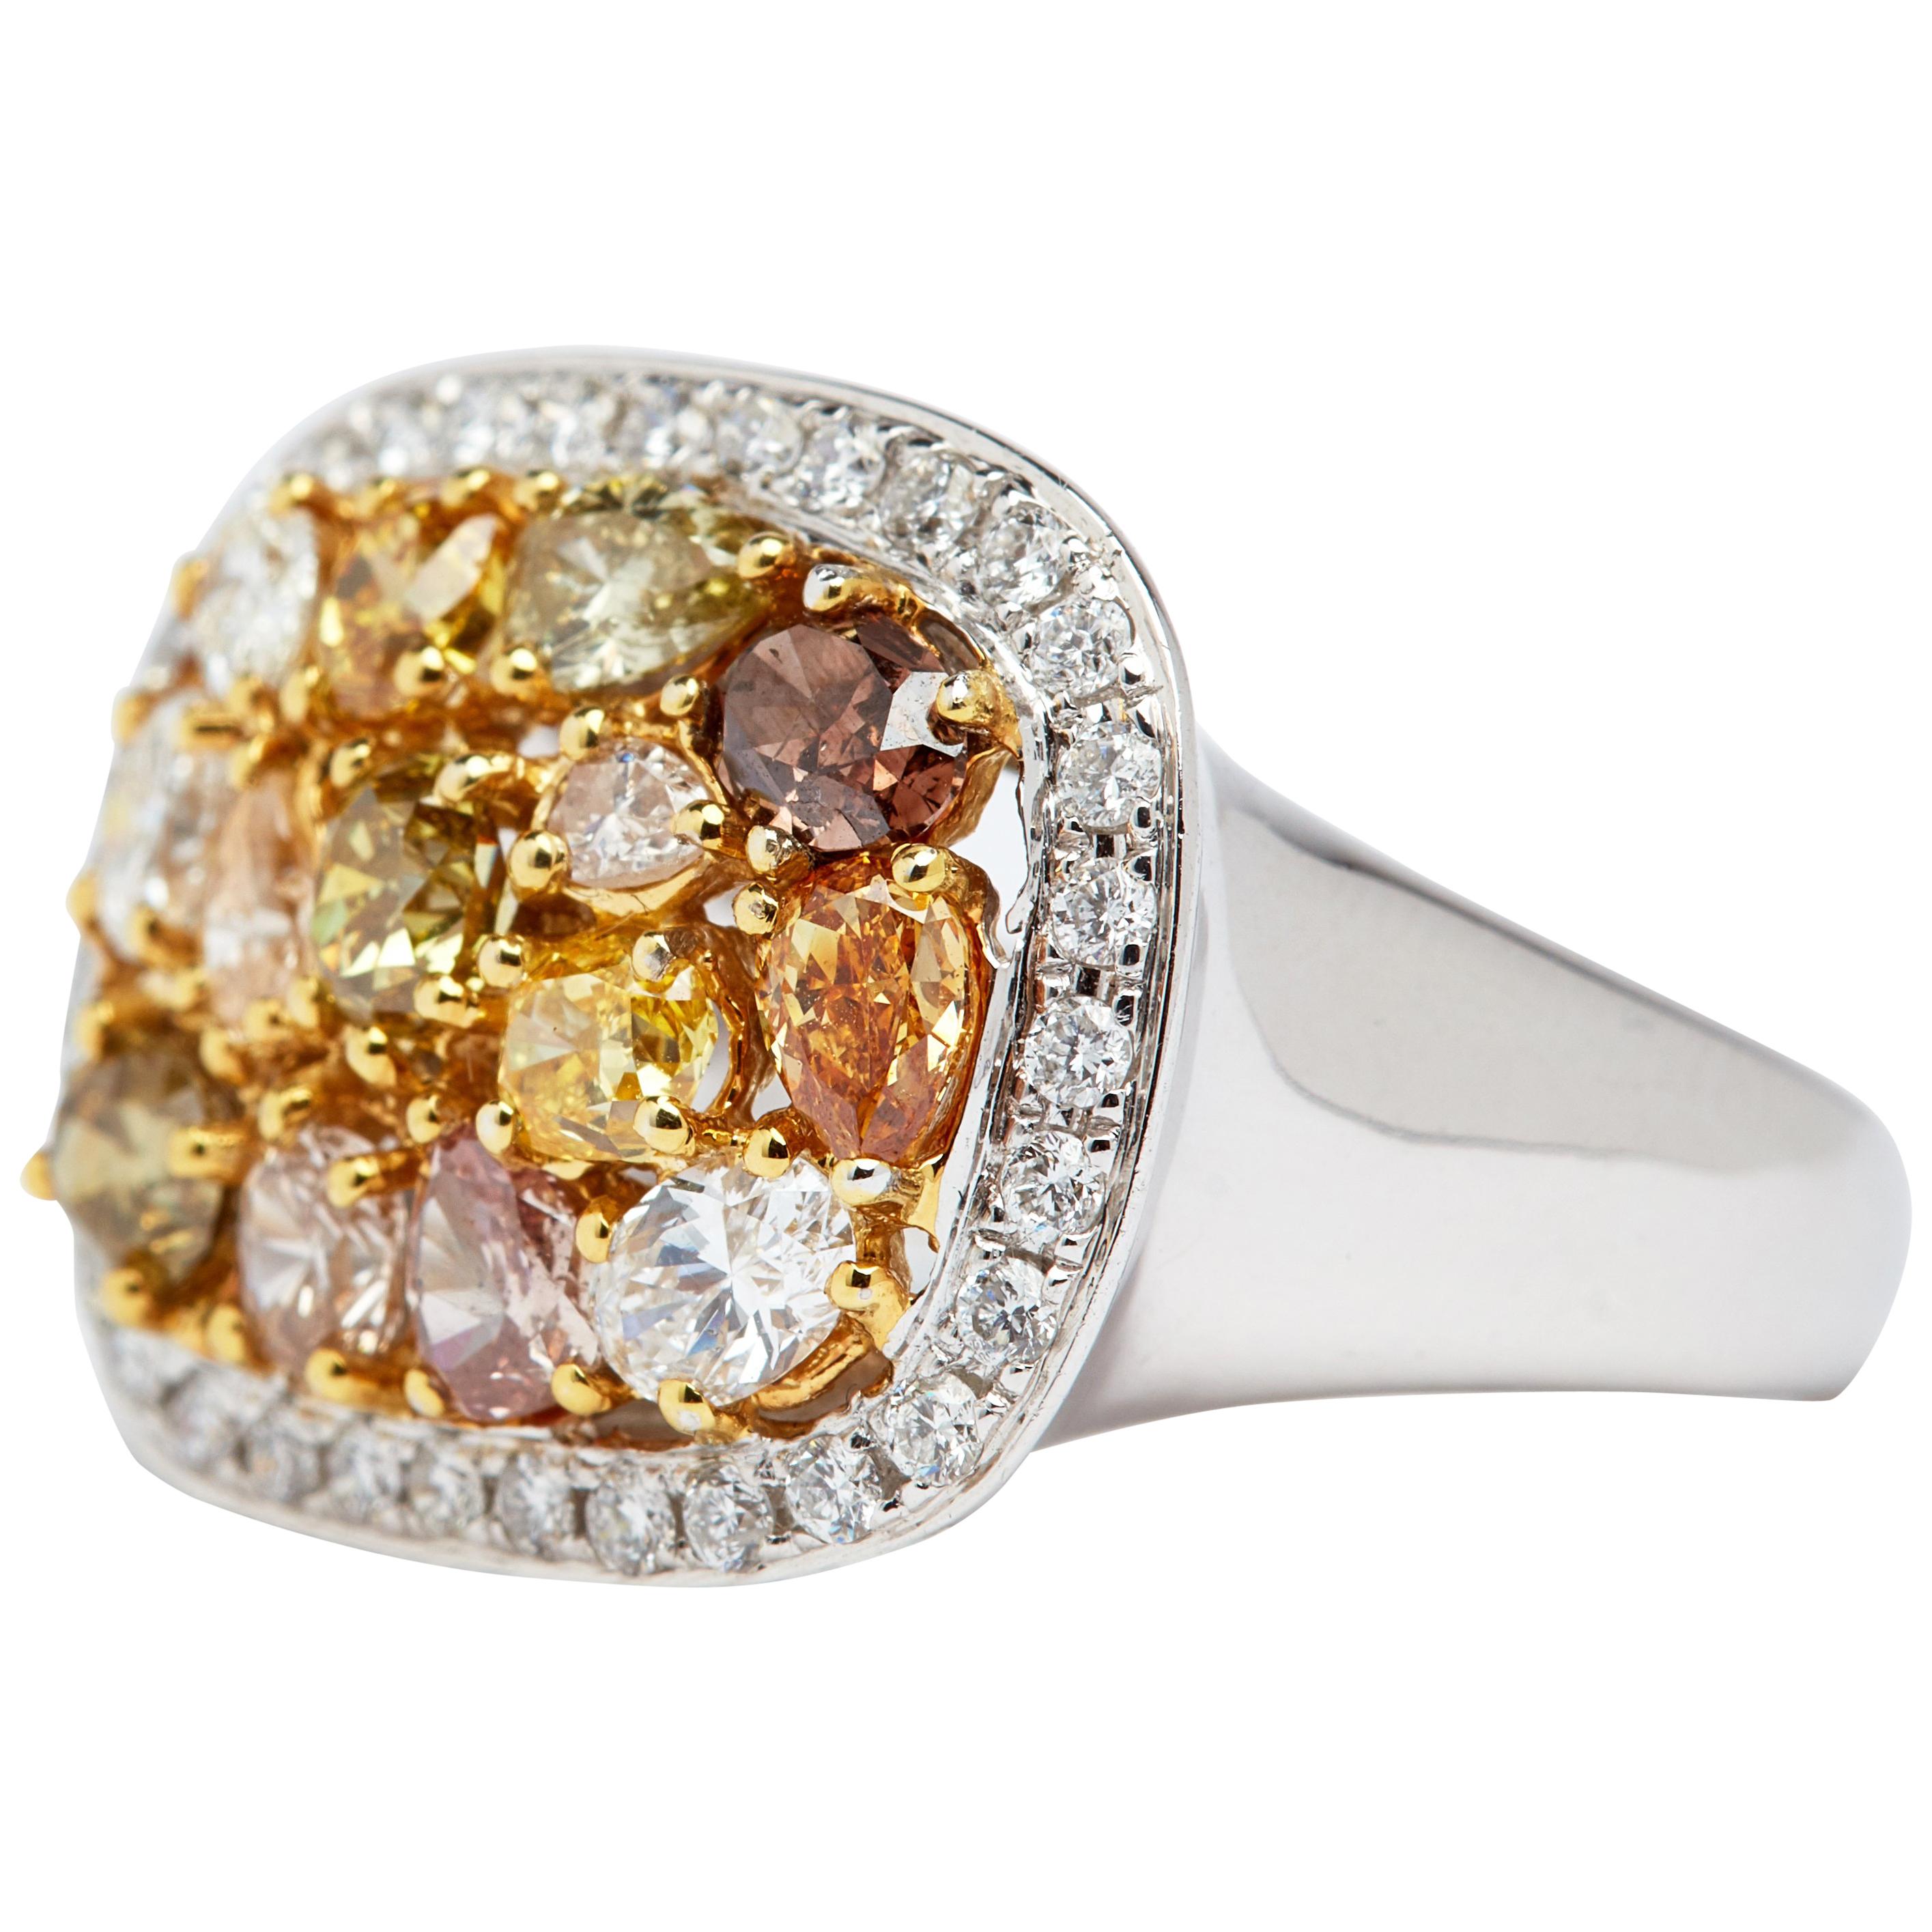 Natural Fancy Colored and White Diamond Ring